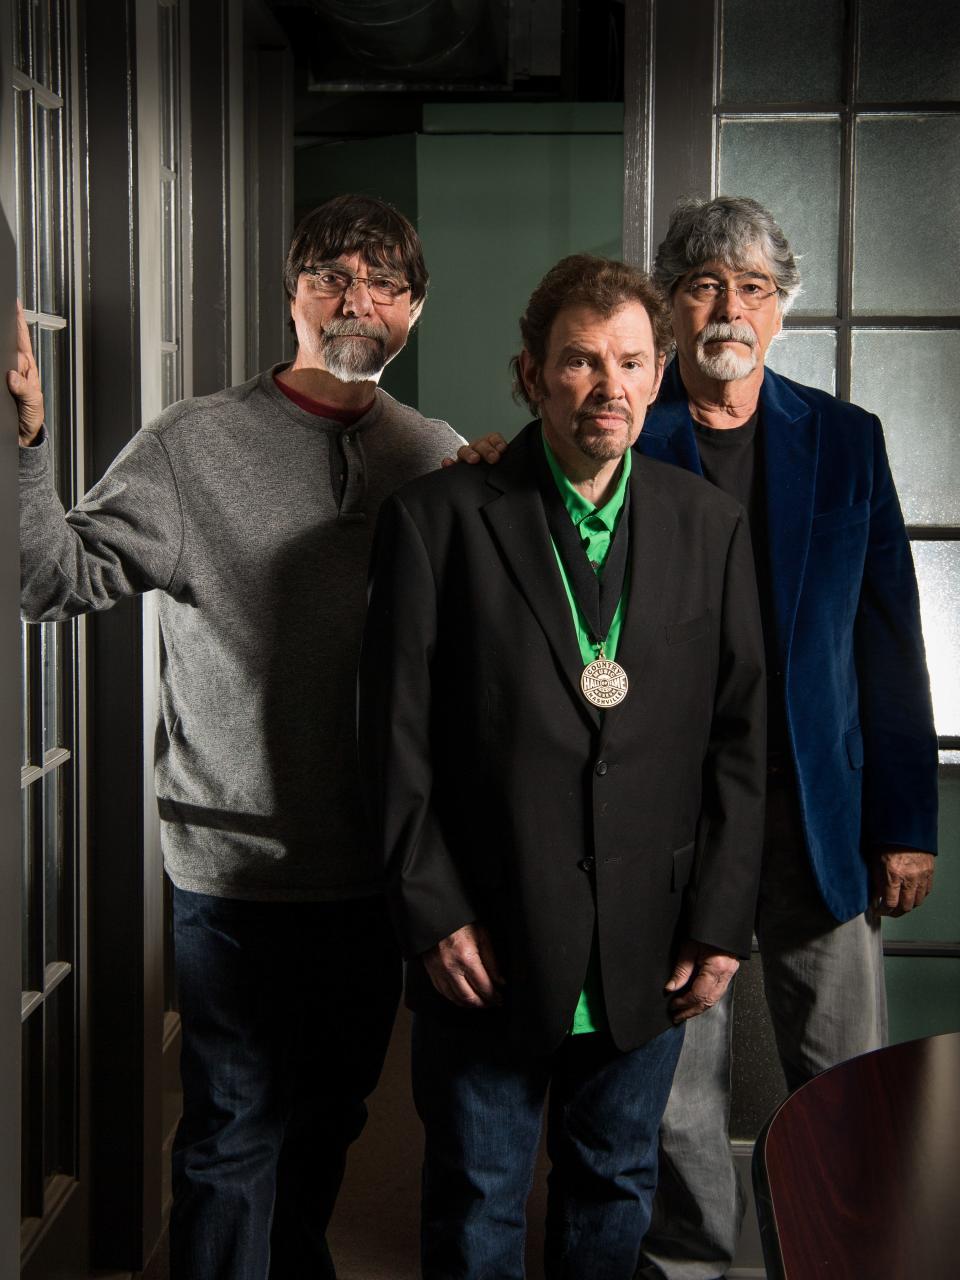 Members of Alabama, from left, Teddy Gentry, Jeff Cook, and Randy Owen, Thursday, April 6, 2017, in Nashville, Tenn.